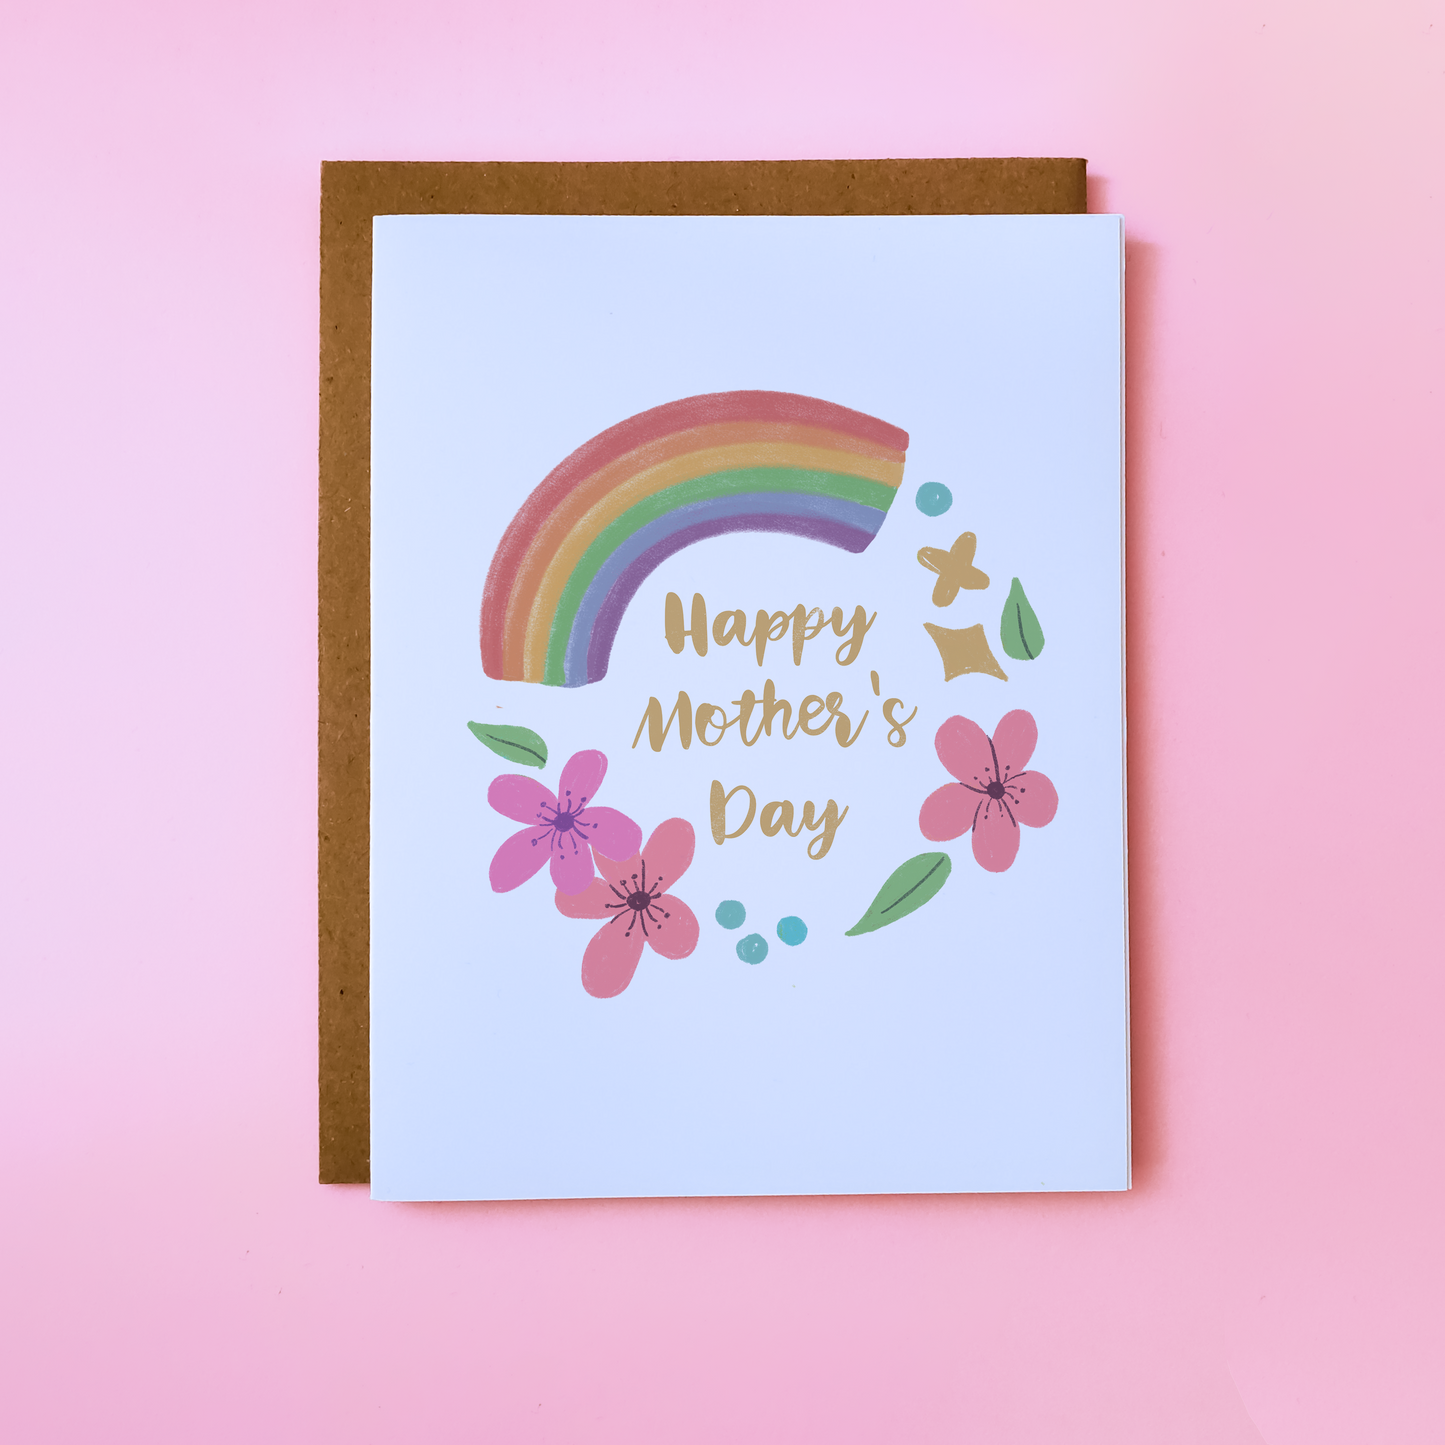 A LGBTQ Parent Card with a kraft envelope set on a pink background. This lgbtq Mother's Day Card features flowers and a rainbow and reads 'Happy Mother's Day'.